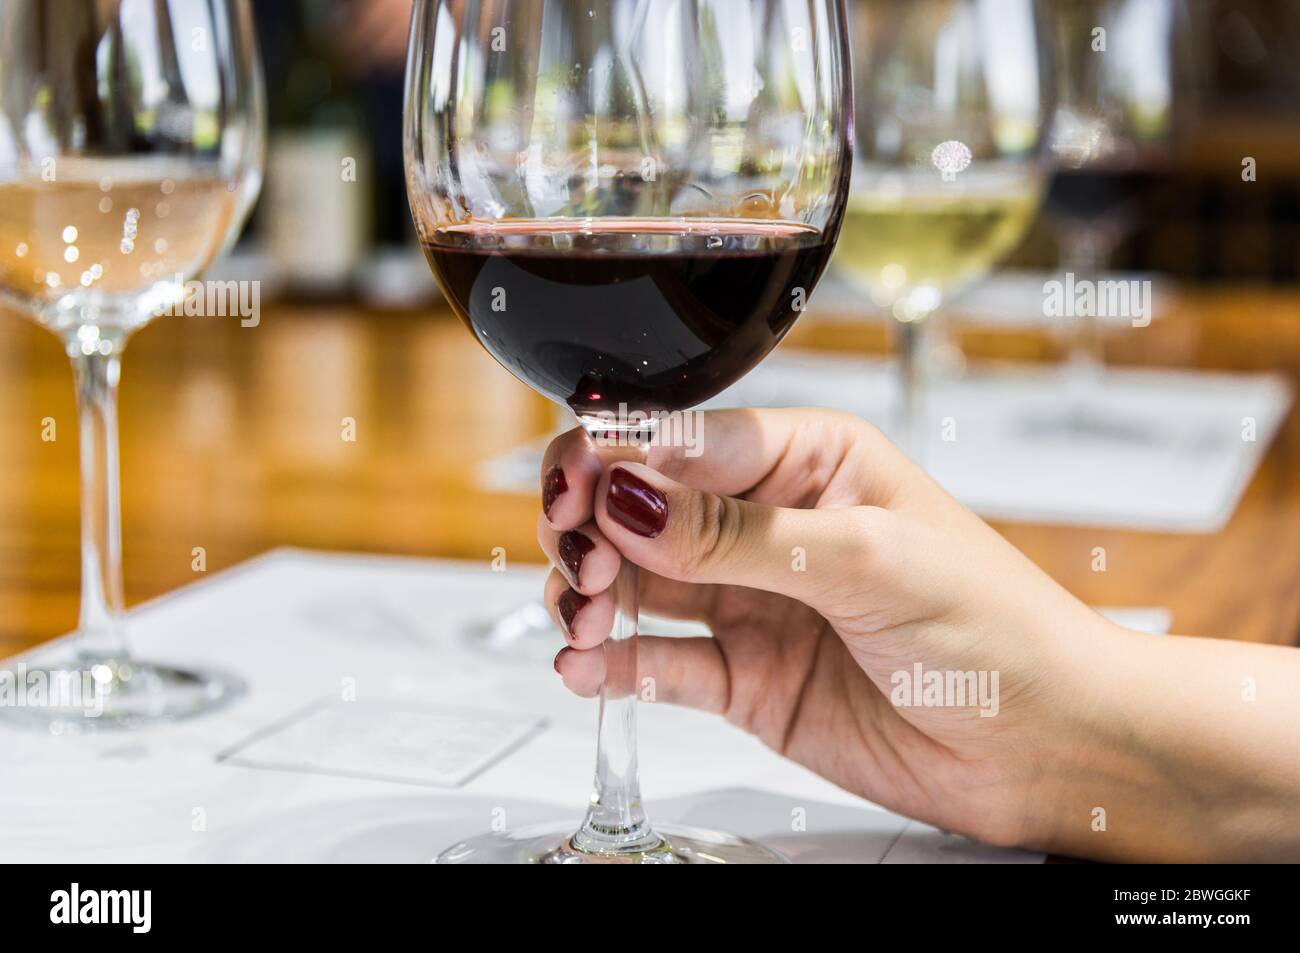 A young woman holding a wine glass with red wine. Stock Photo